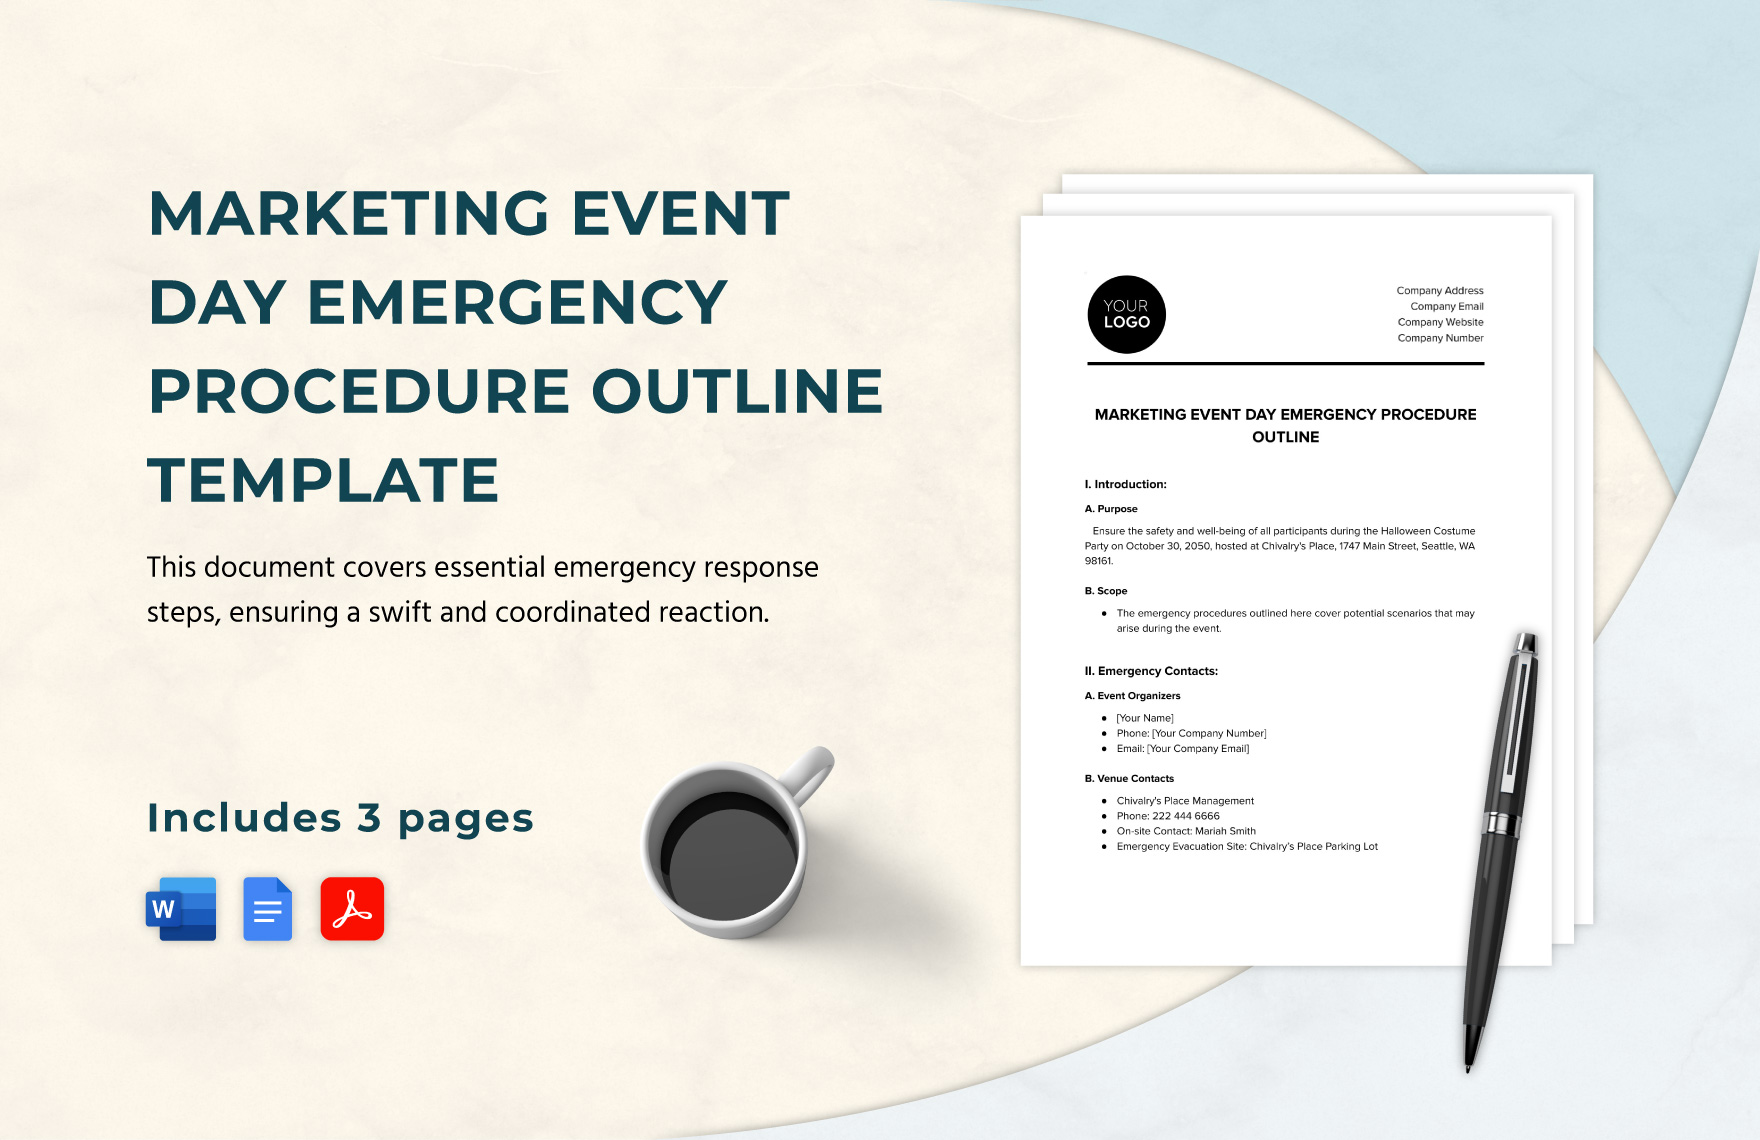 Marketing Event Day Emergency Procedure Outline Template in Word, Google Docs, PDF